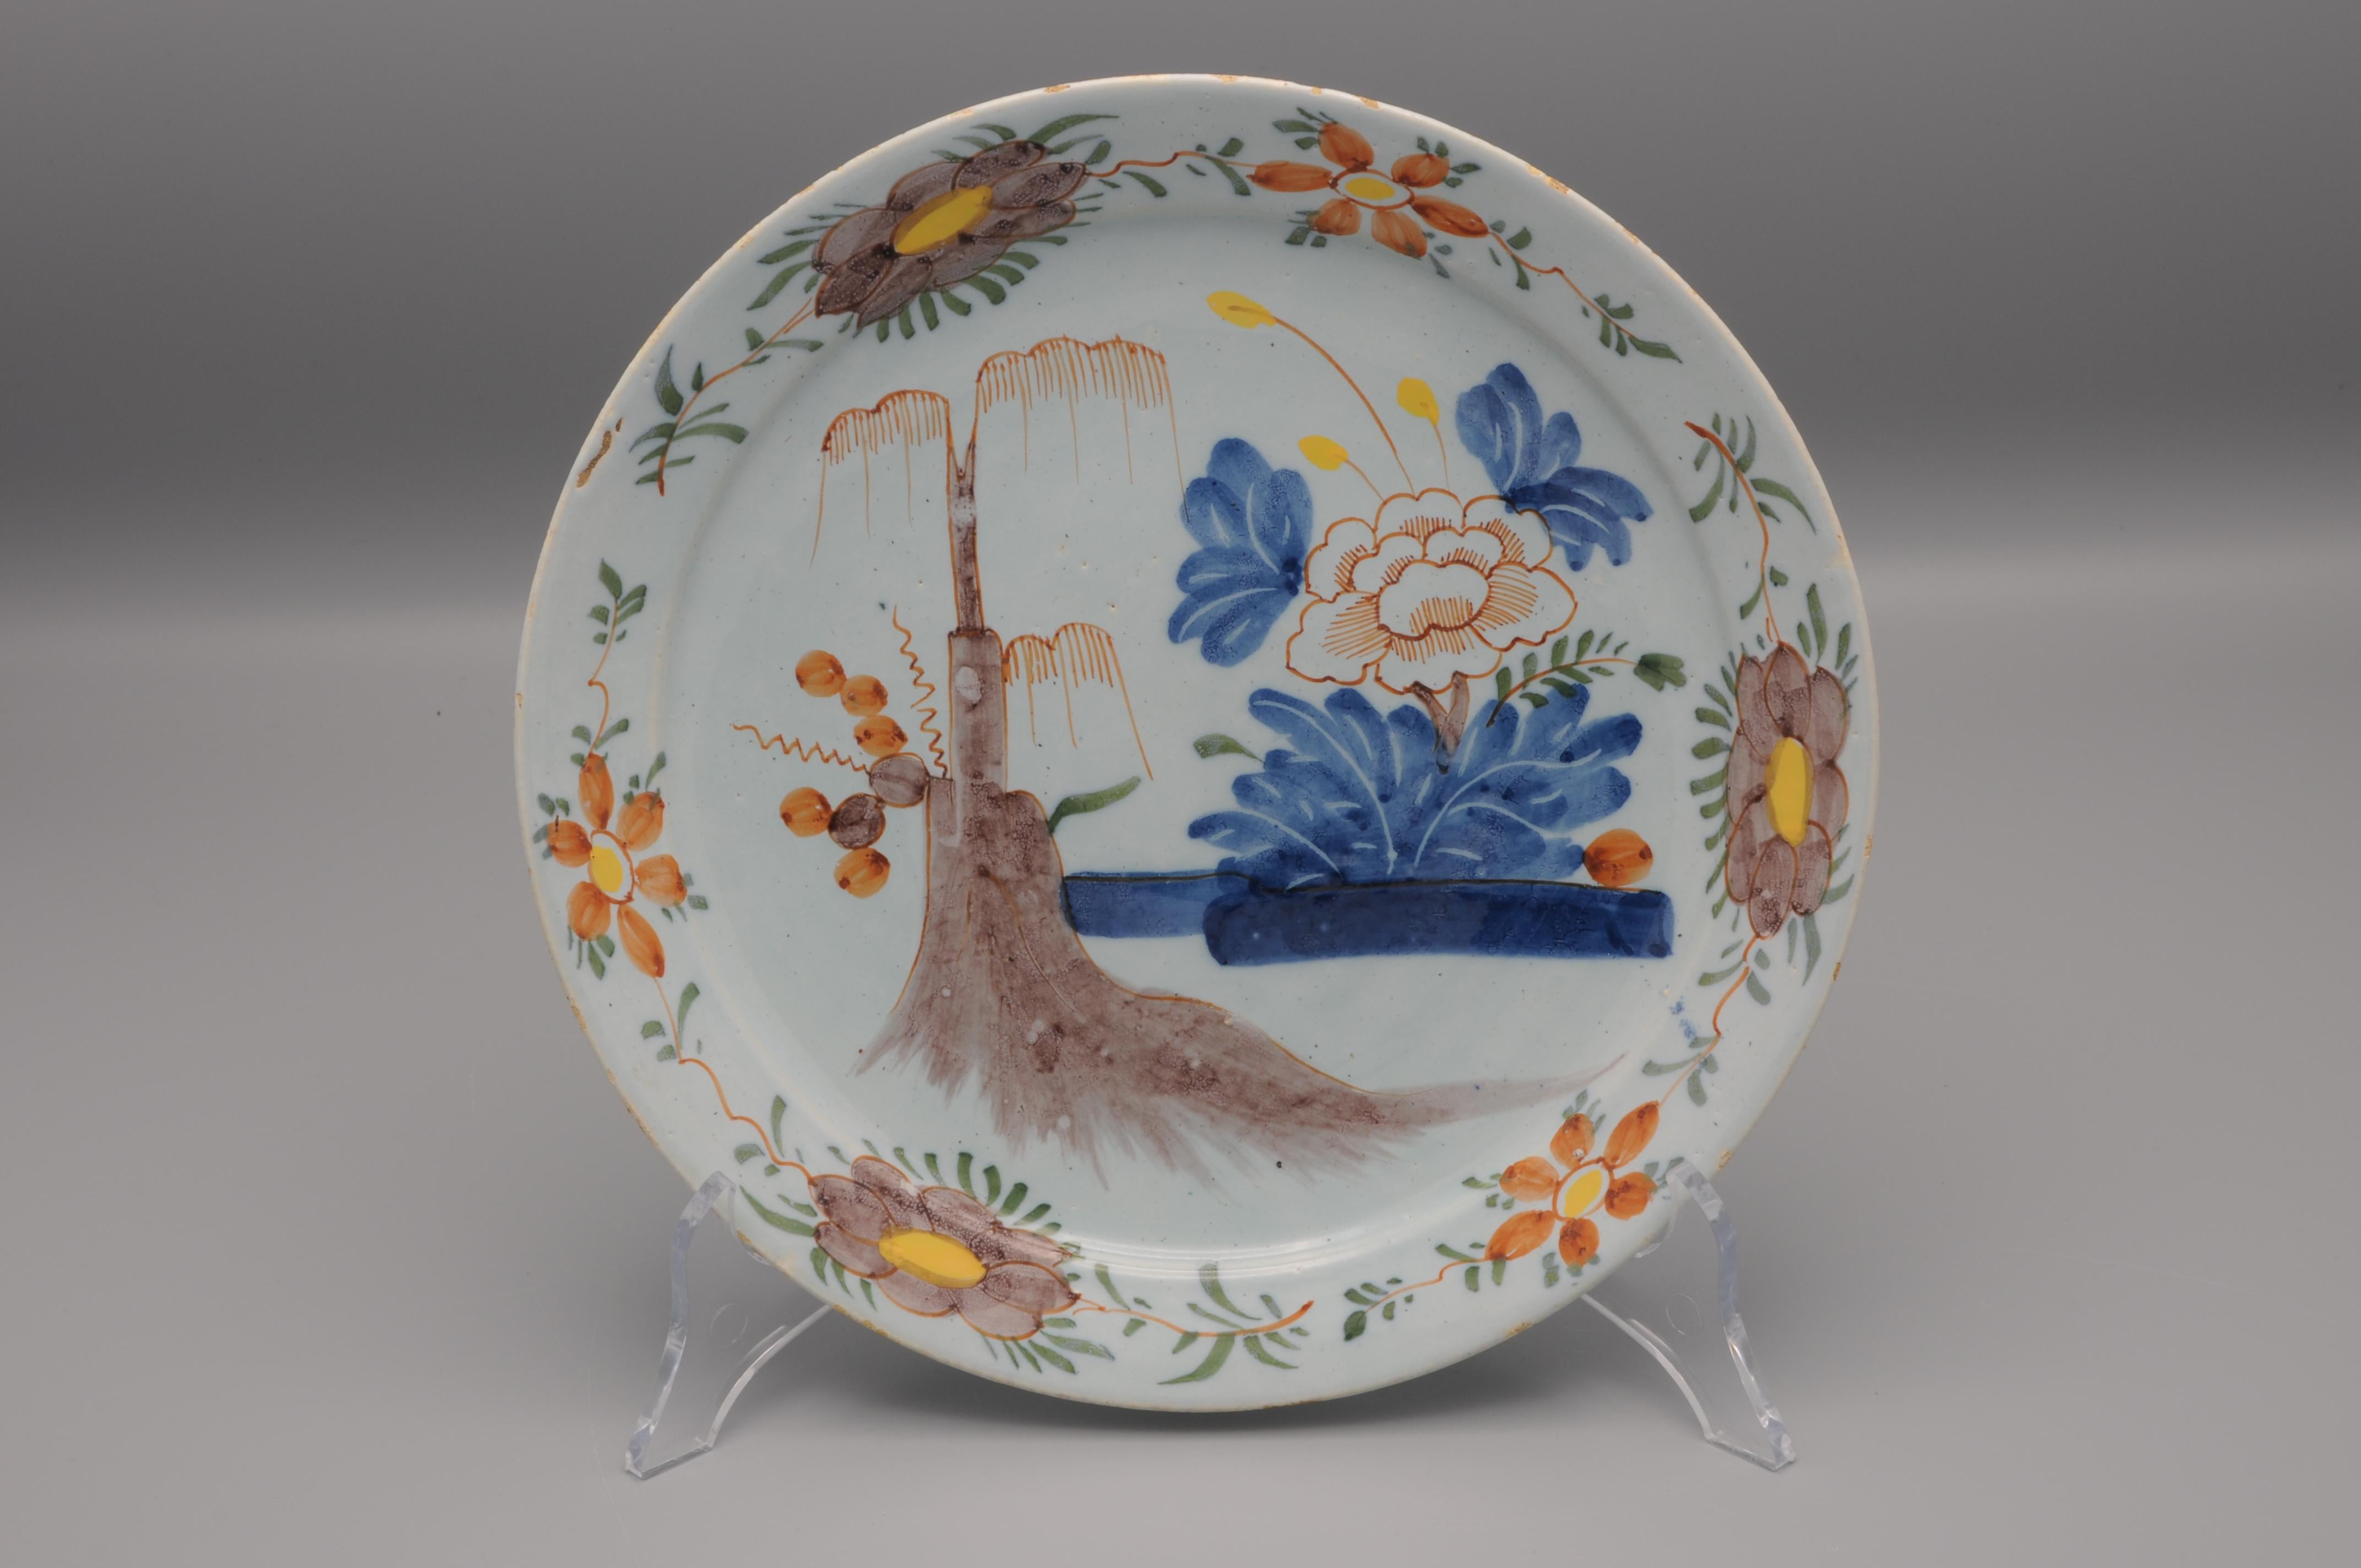 Glazed Delft  - 18th century Polychrome Chinoiserie Plate